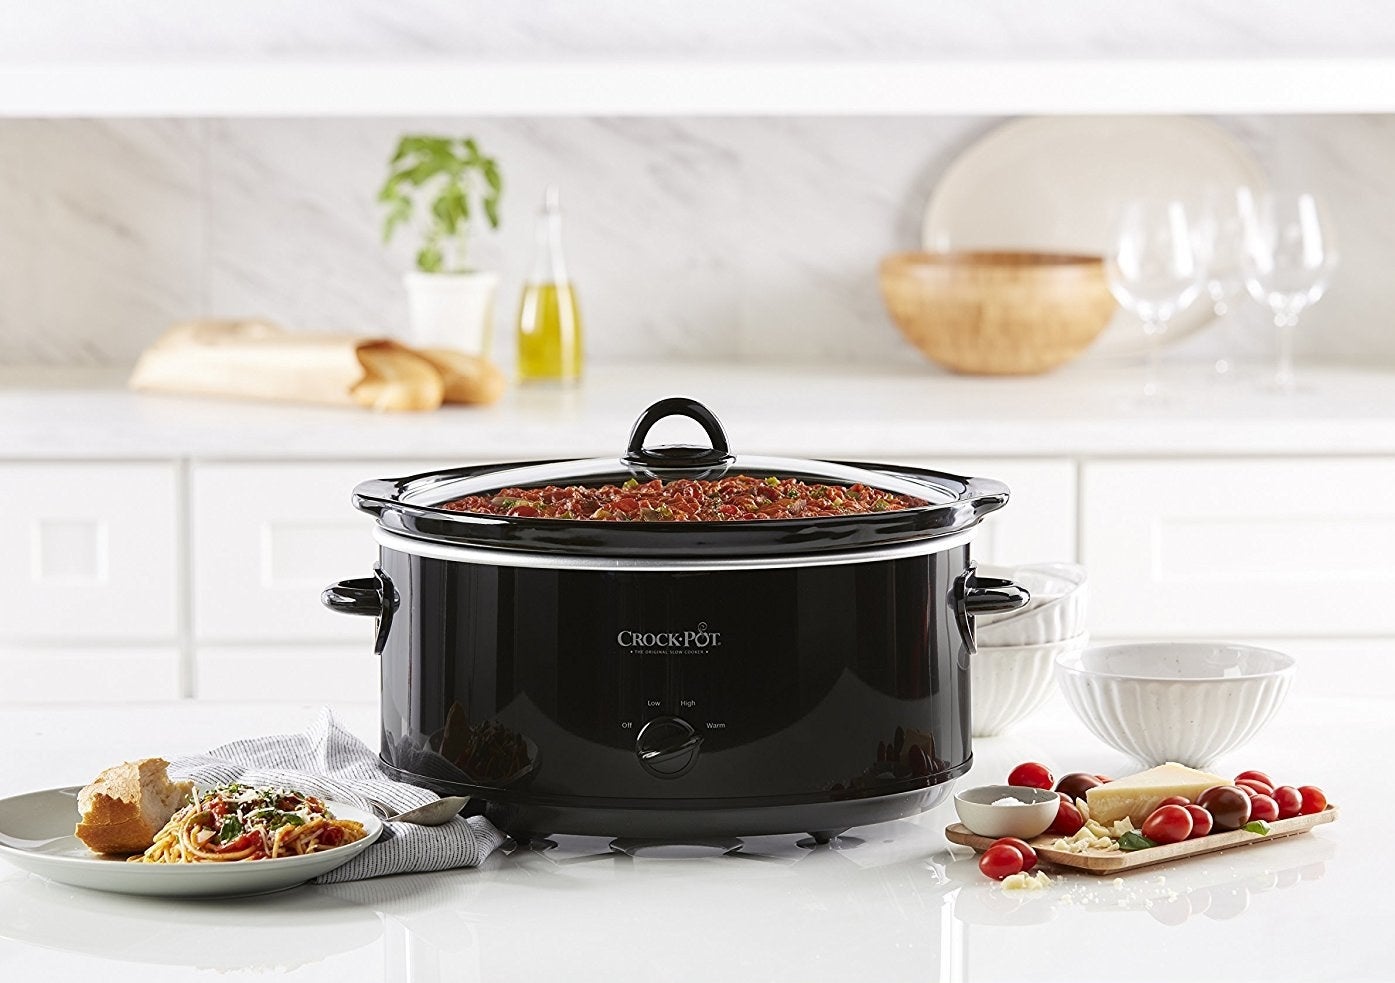 The black crockpot which has one control knob and a glass lid